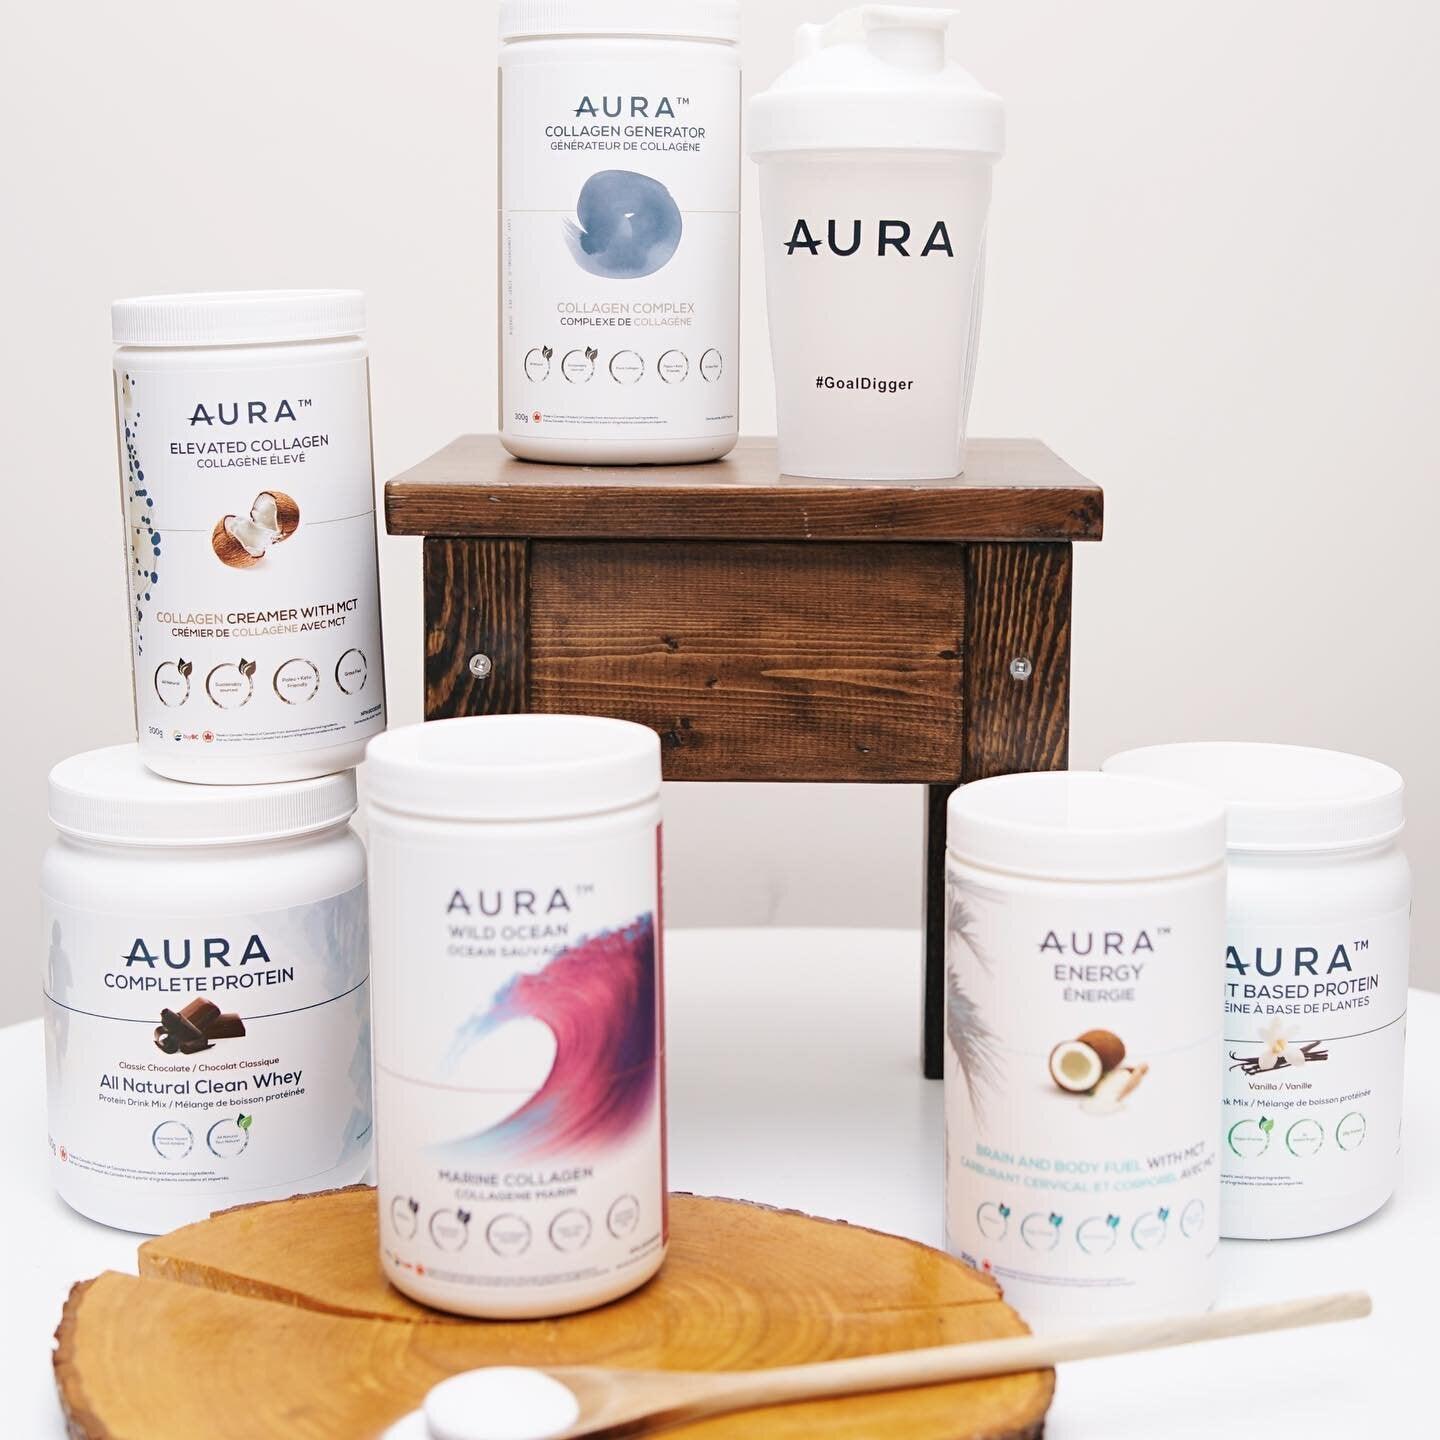 5 Ways to Build a Bulletproof Immune System The Ace Class Blog Post - AURA Nutrition